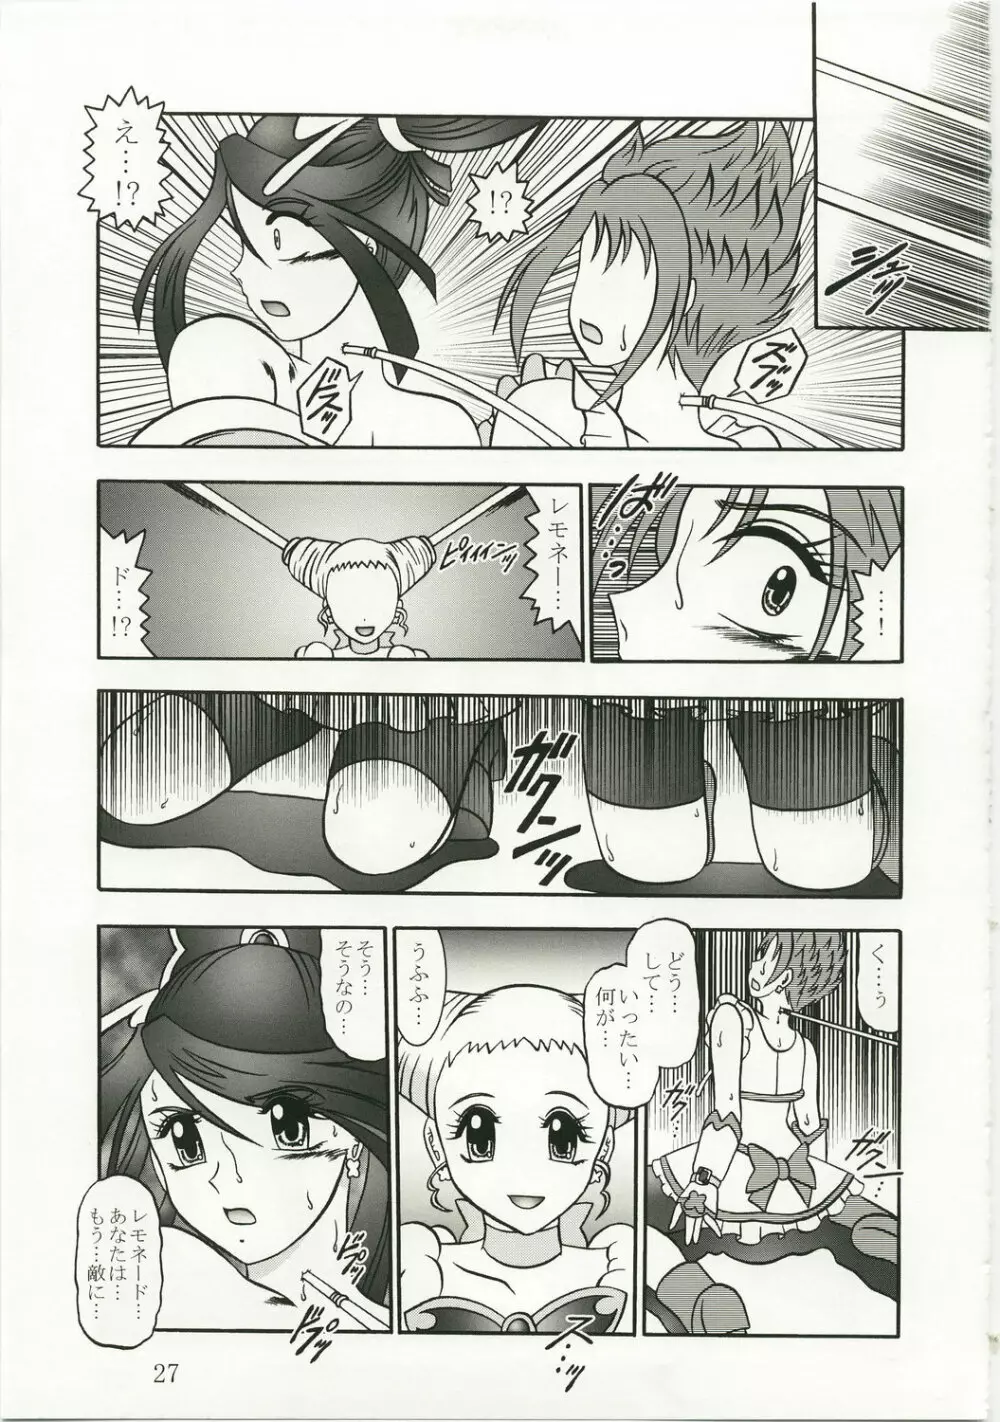 GREATEST ECLIPSE 胡蝶 ～Side:A - page27